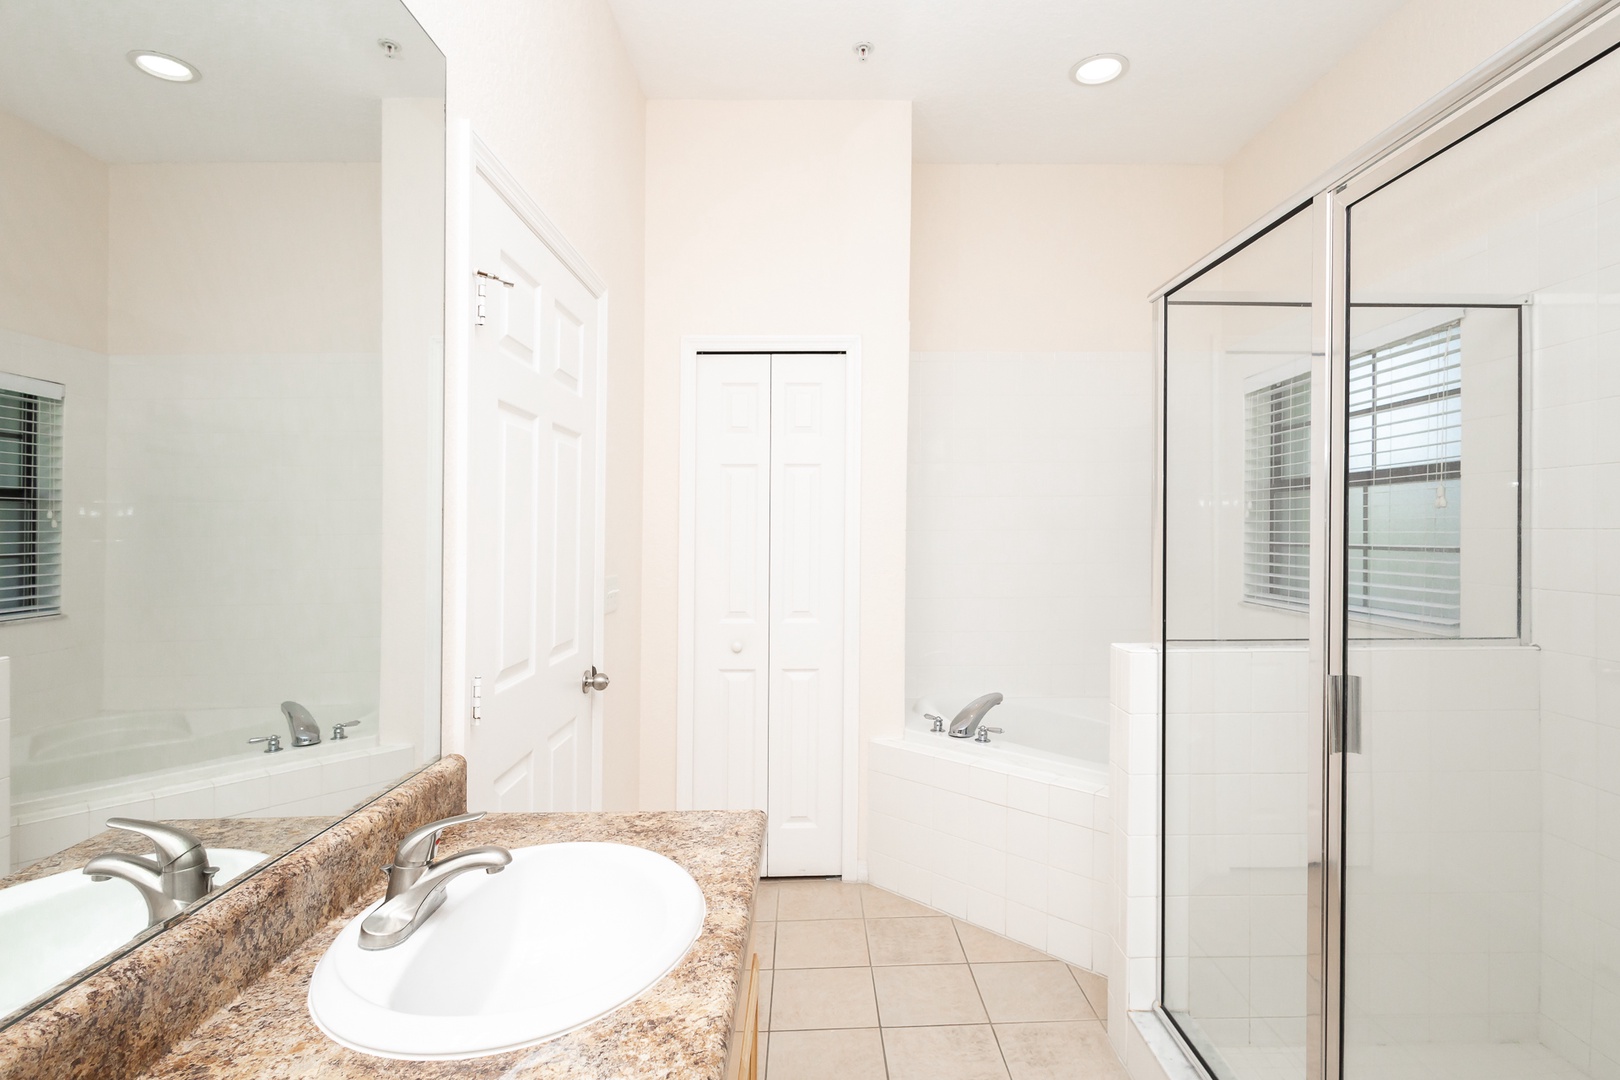 The king en suite offers a dual vanity, glass shower, & luxurious soaking tub